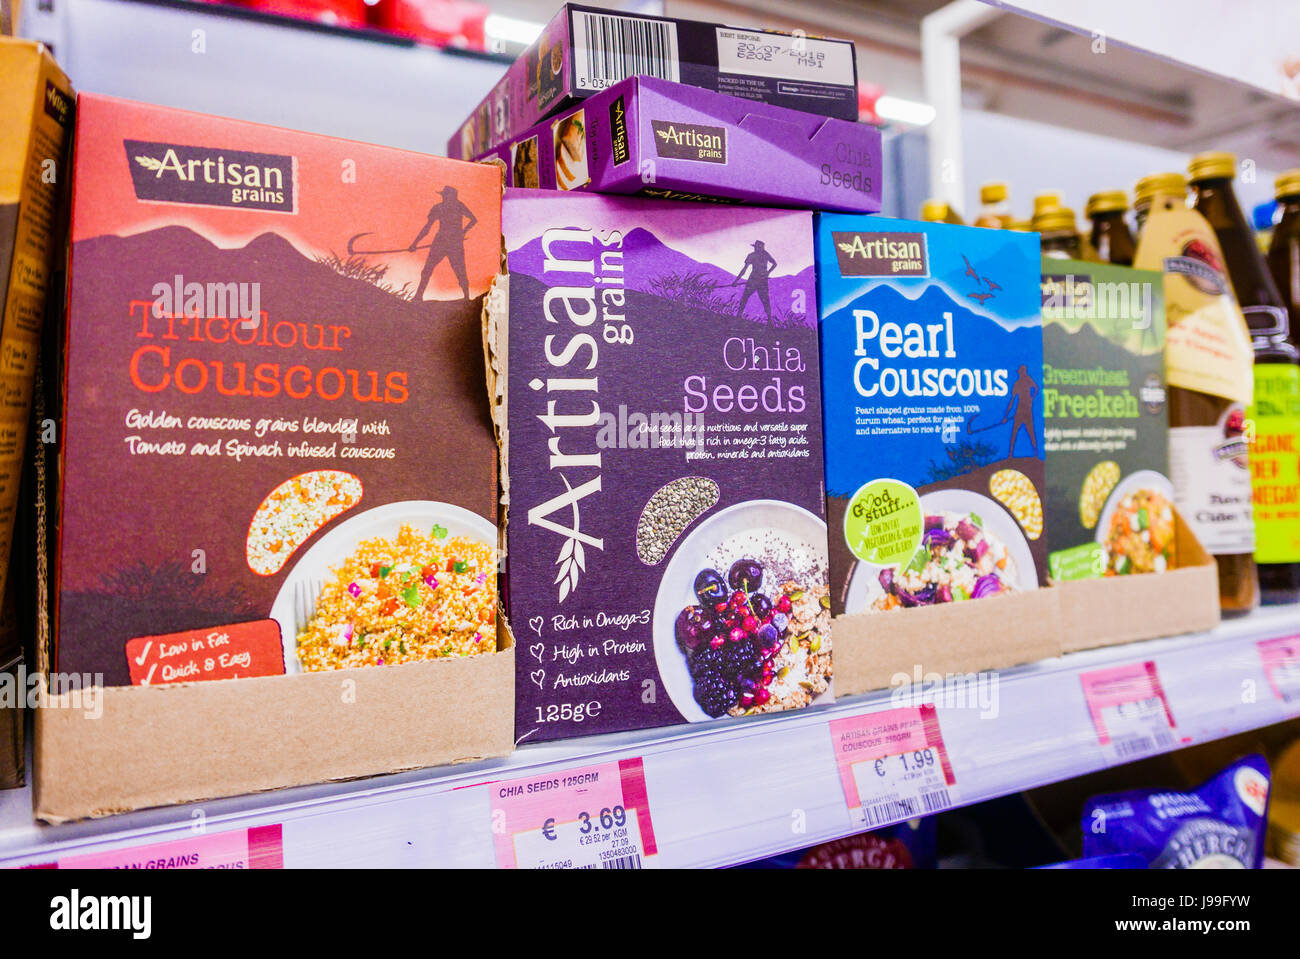 Tricolour couscous, chia seeds, pearl couscous and Freekeh breakfast cereals on the shelf in a supermarket. Stock Photo